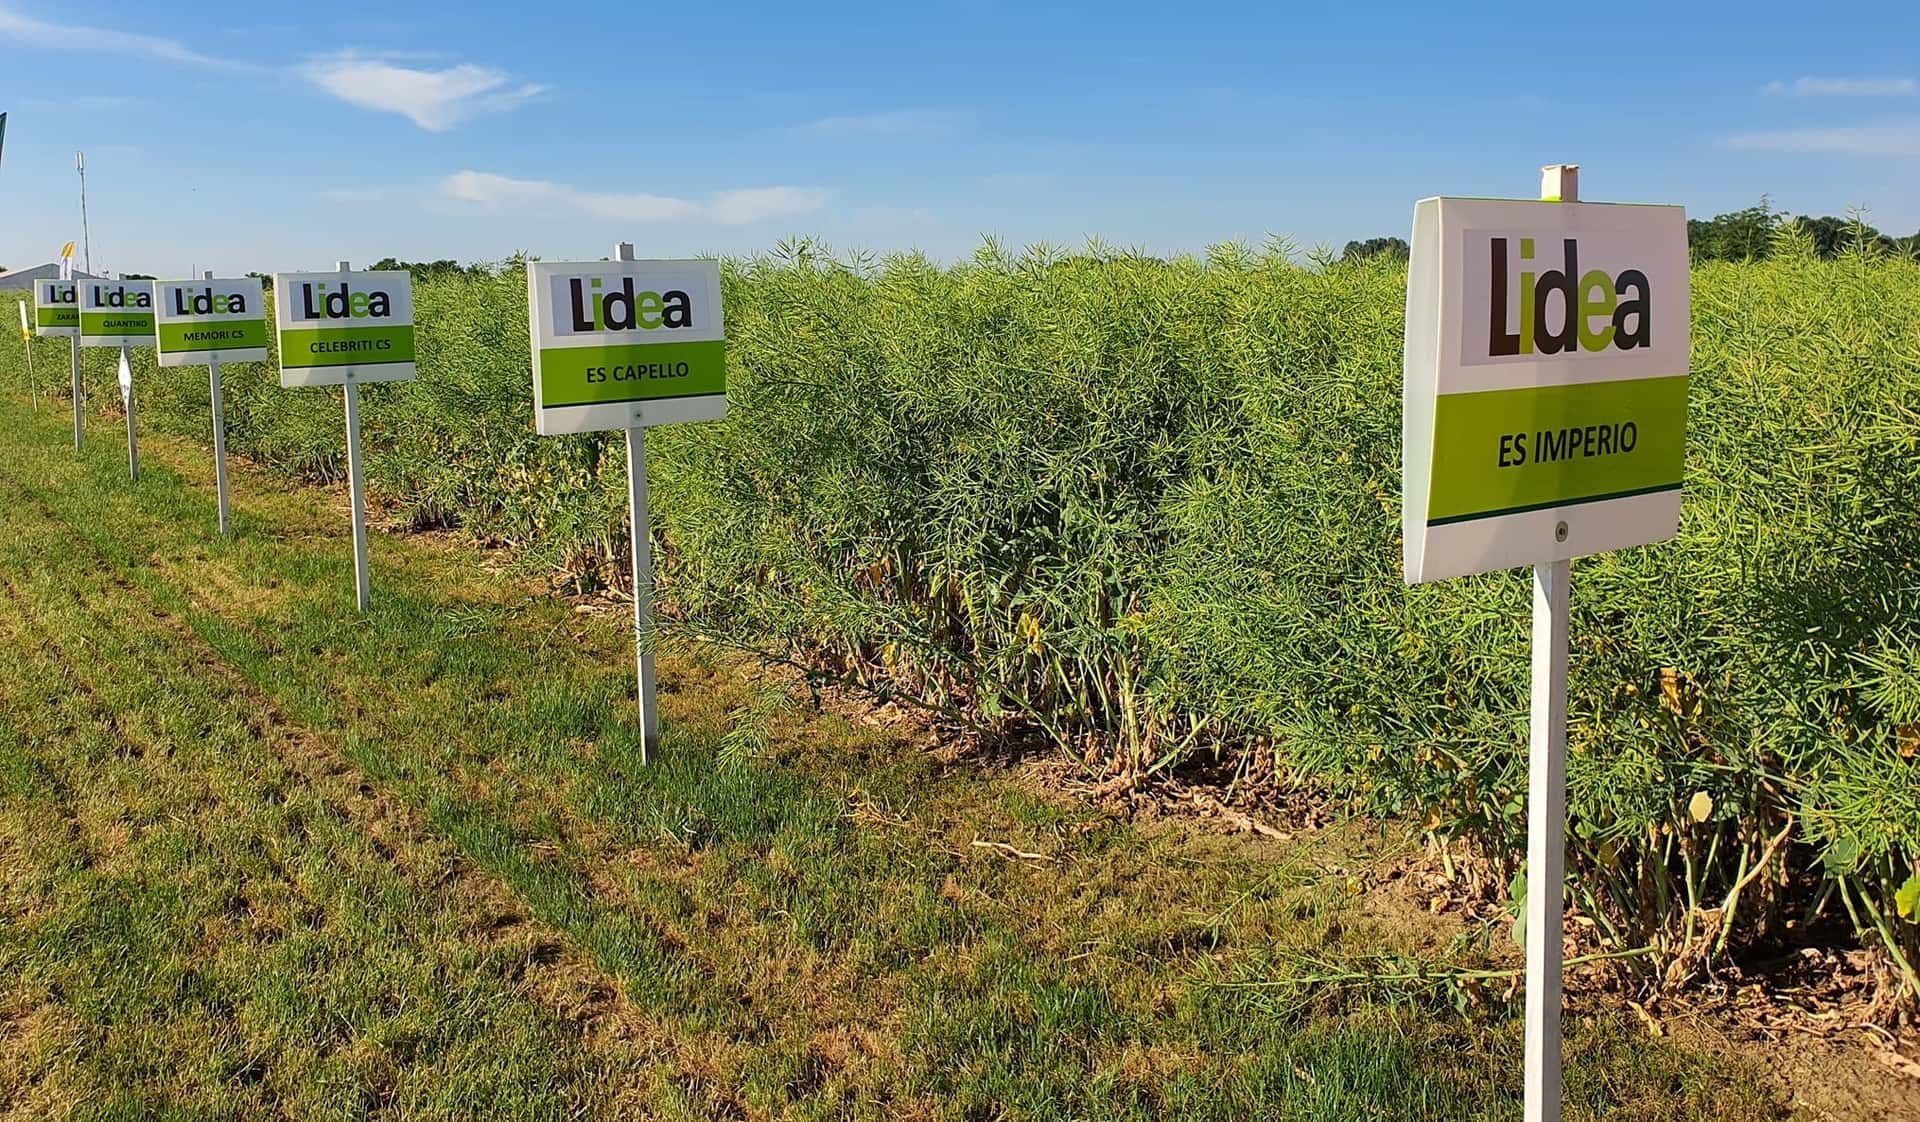 The latest seeds trends with Agritel & Lidea